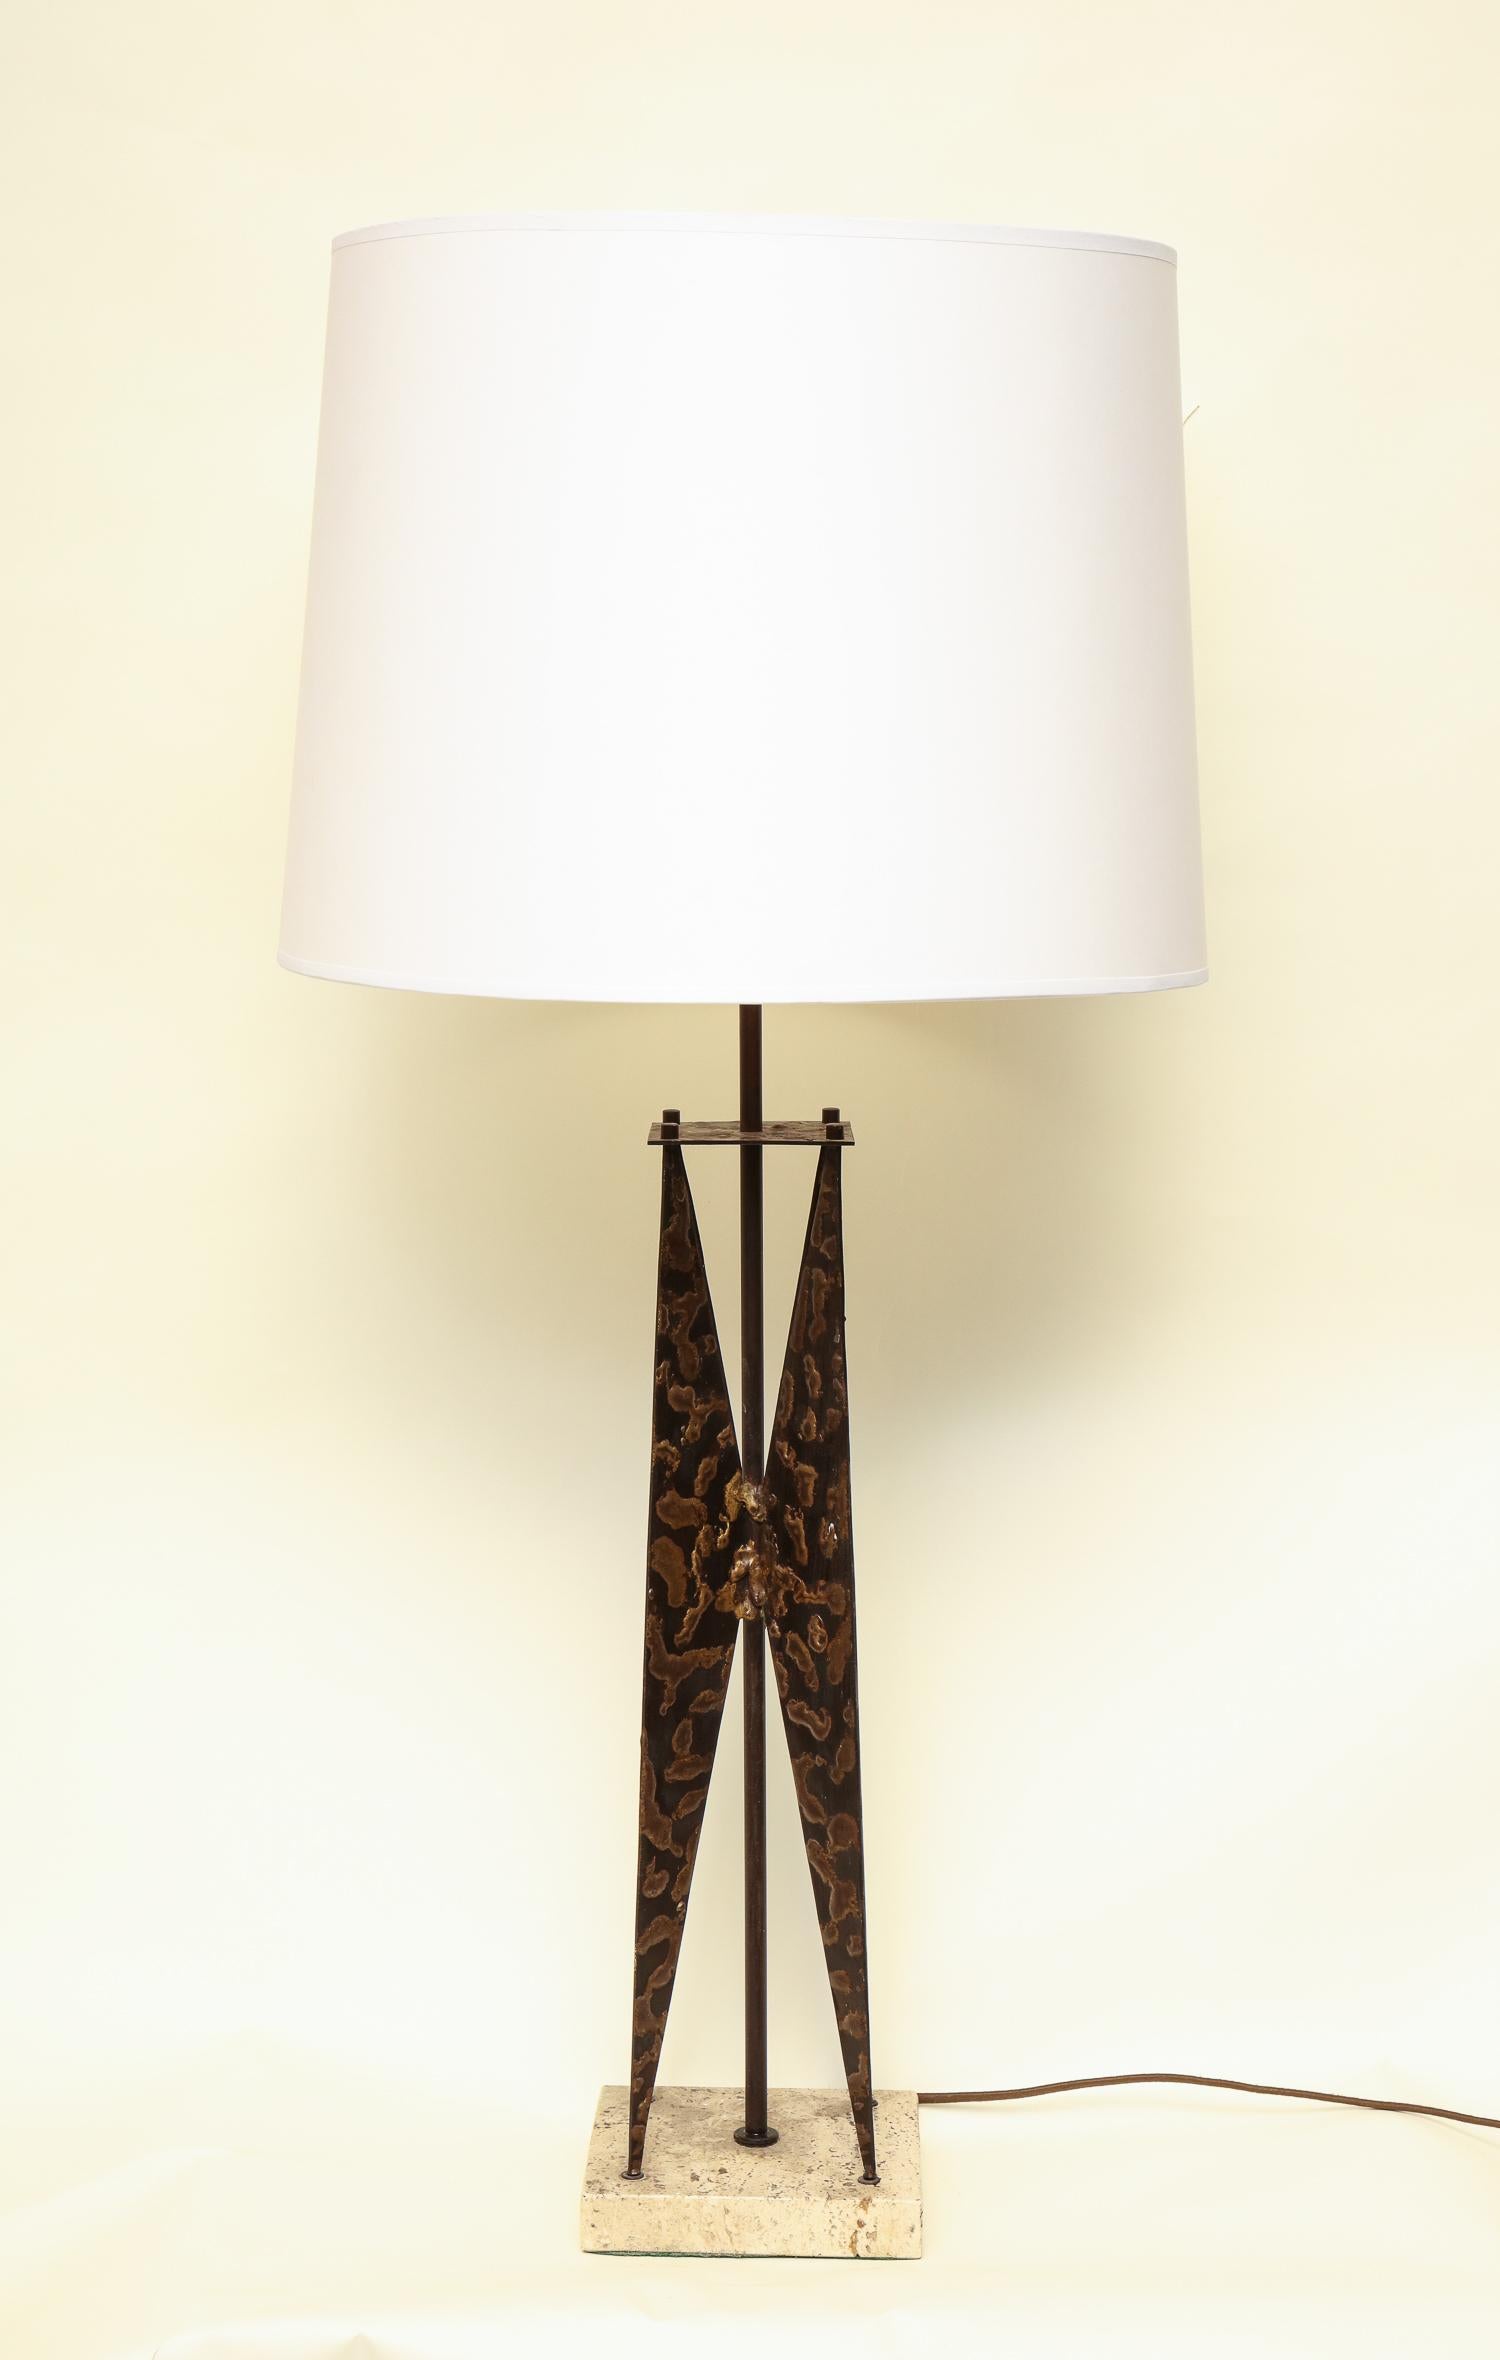 Italian Fantoni Table Lamp Mid-Century Modern Sculptural Form Crafted of Patinated Iron For Sale